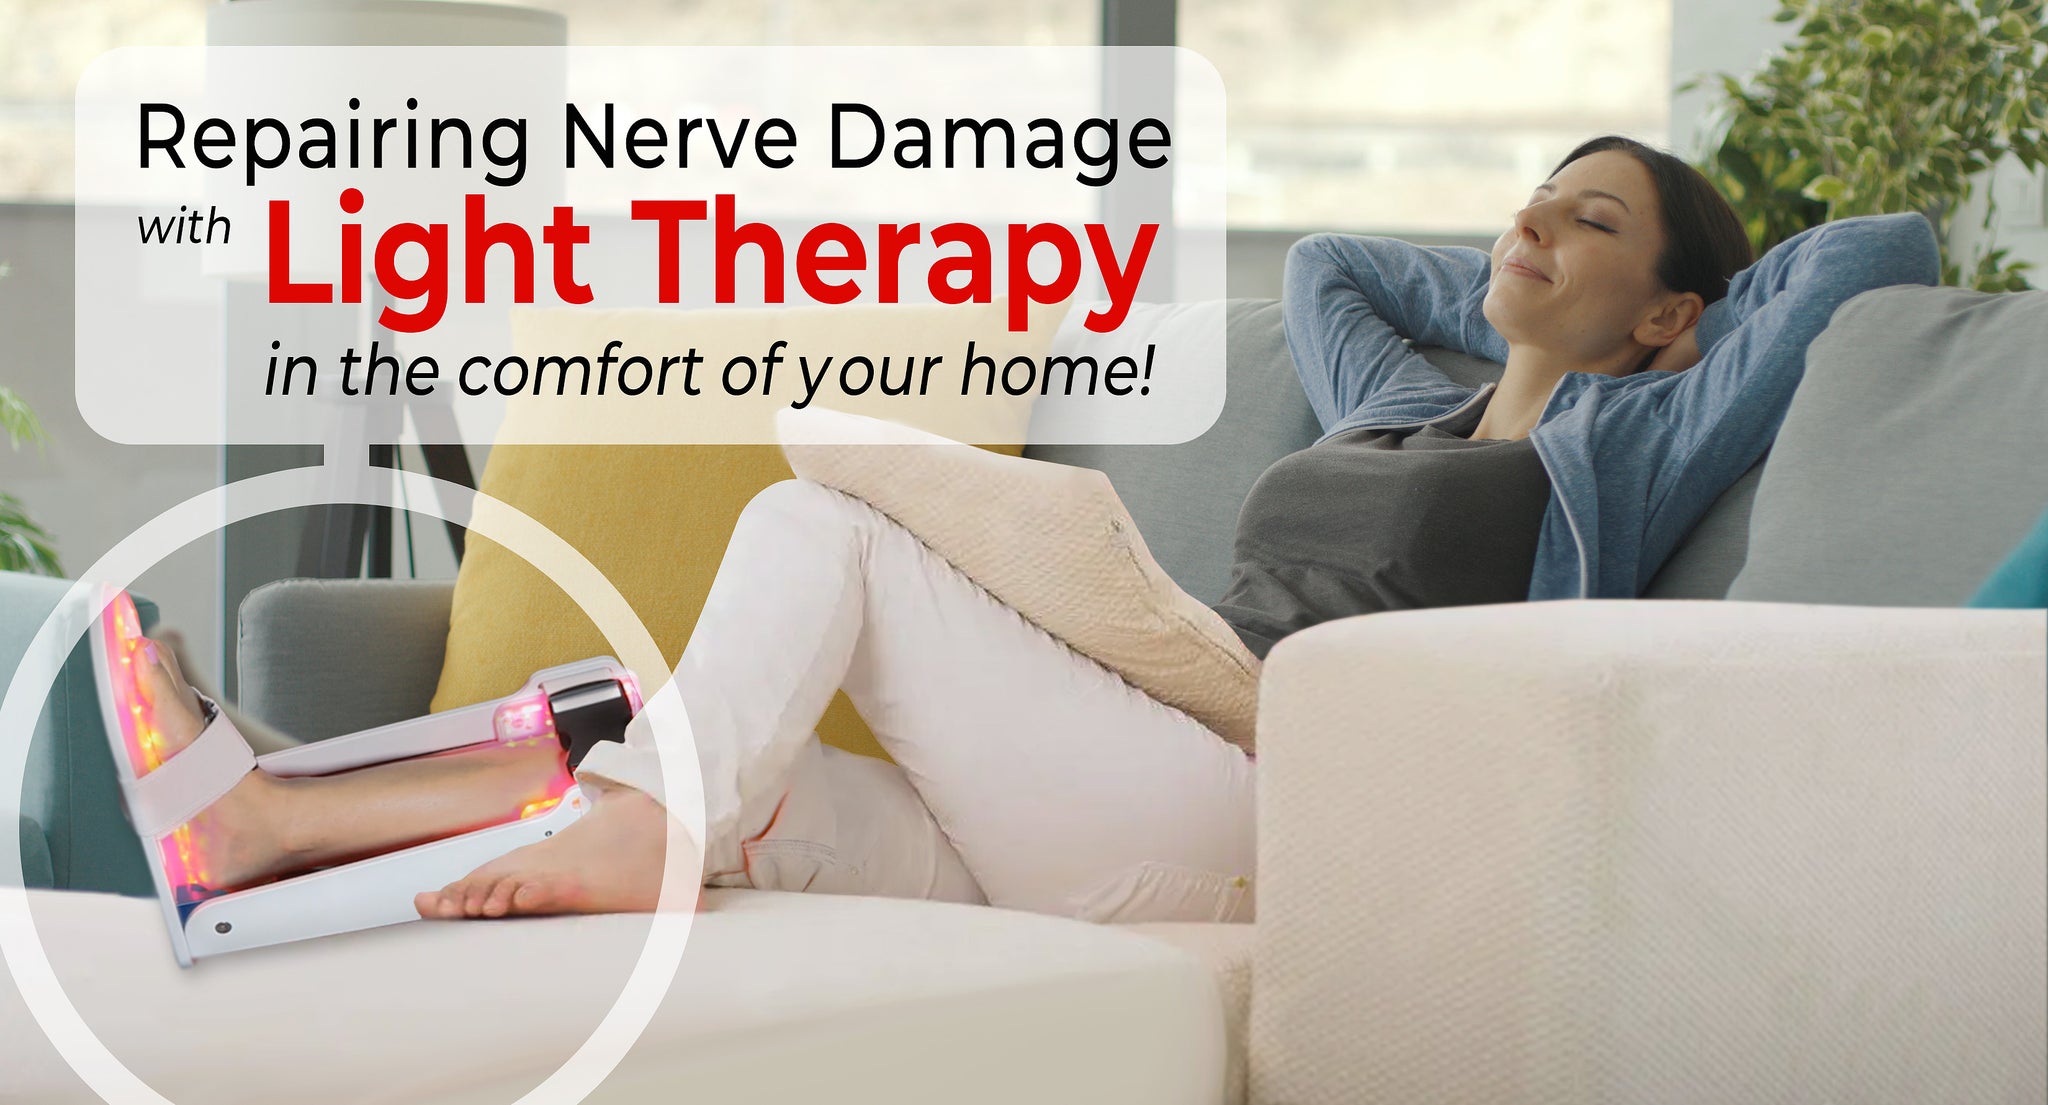 NeuropaCalm Infrared Therapy – NUPHORIA cm